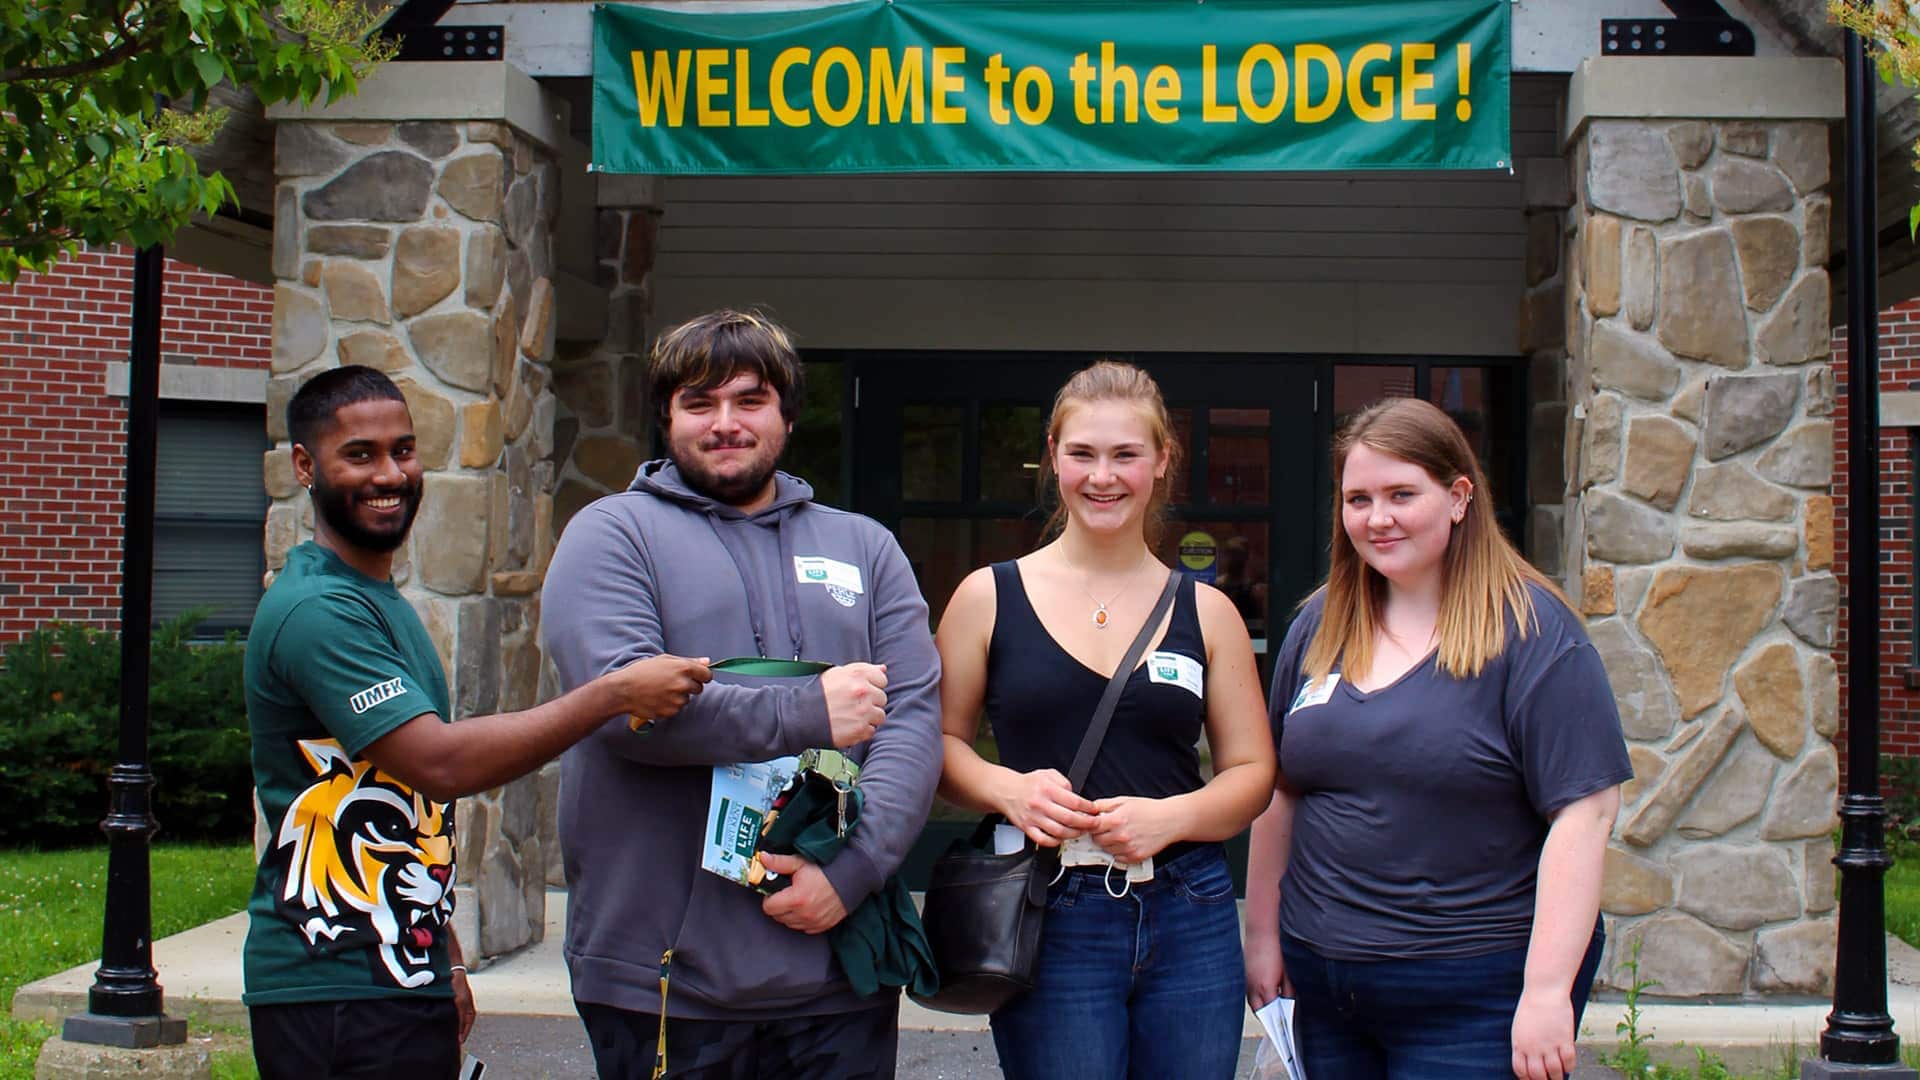 Four students stand together in front of the Lodge entrance. A banner that reads Welcome to the Lodge hangs above the building entryway.